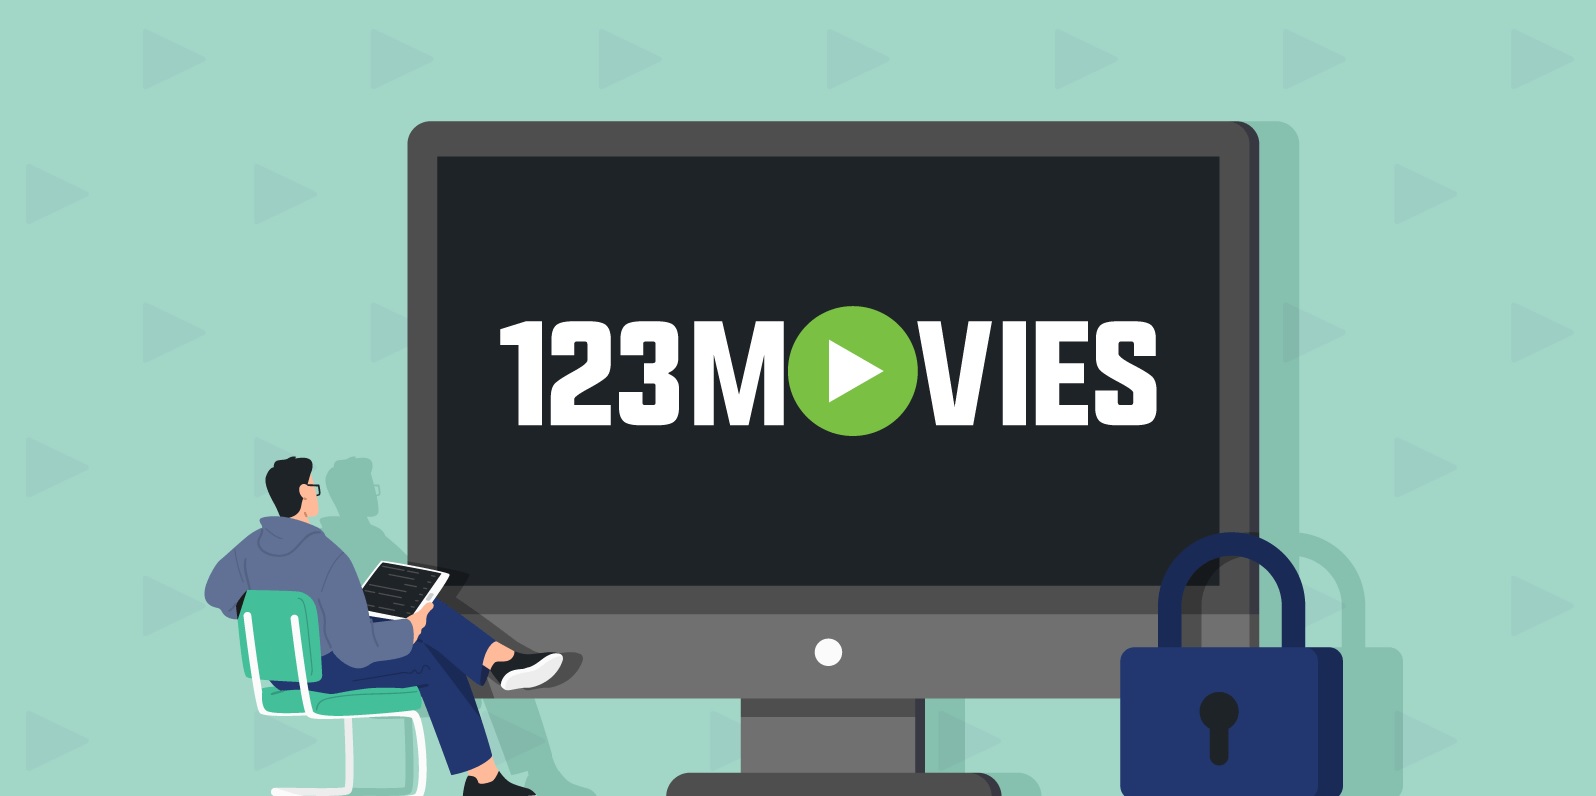 How Do 123Movies Function?